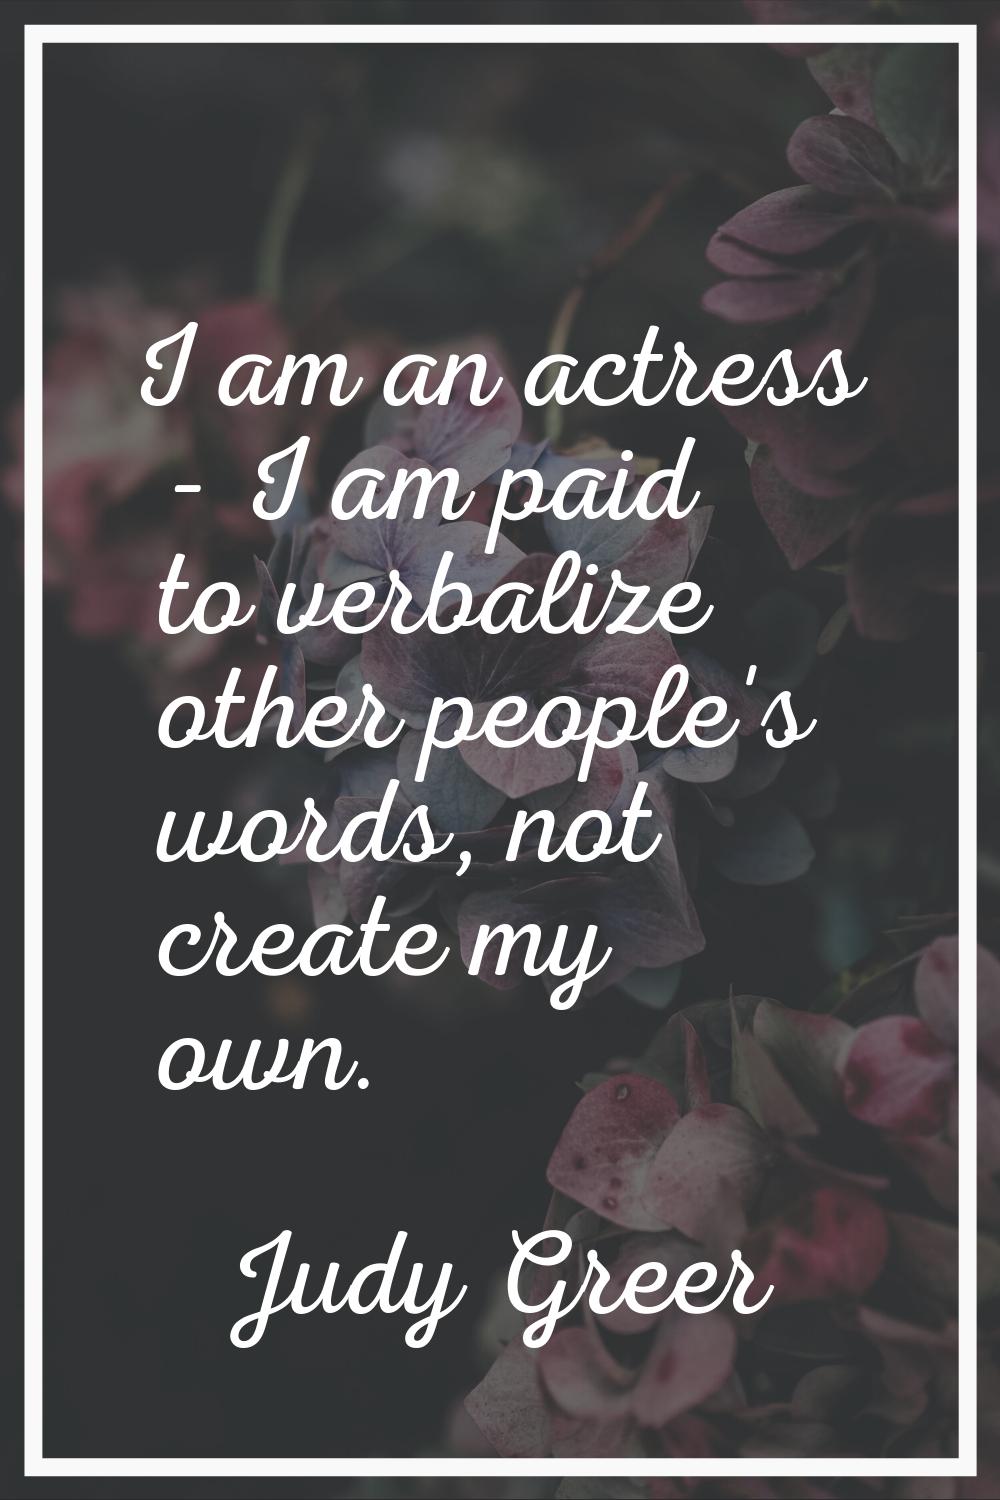 I am an actress - I am paid to verbalize other people's words, not create my own.